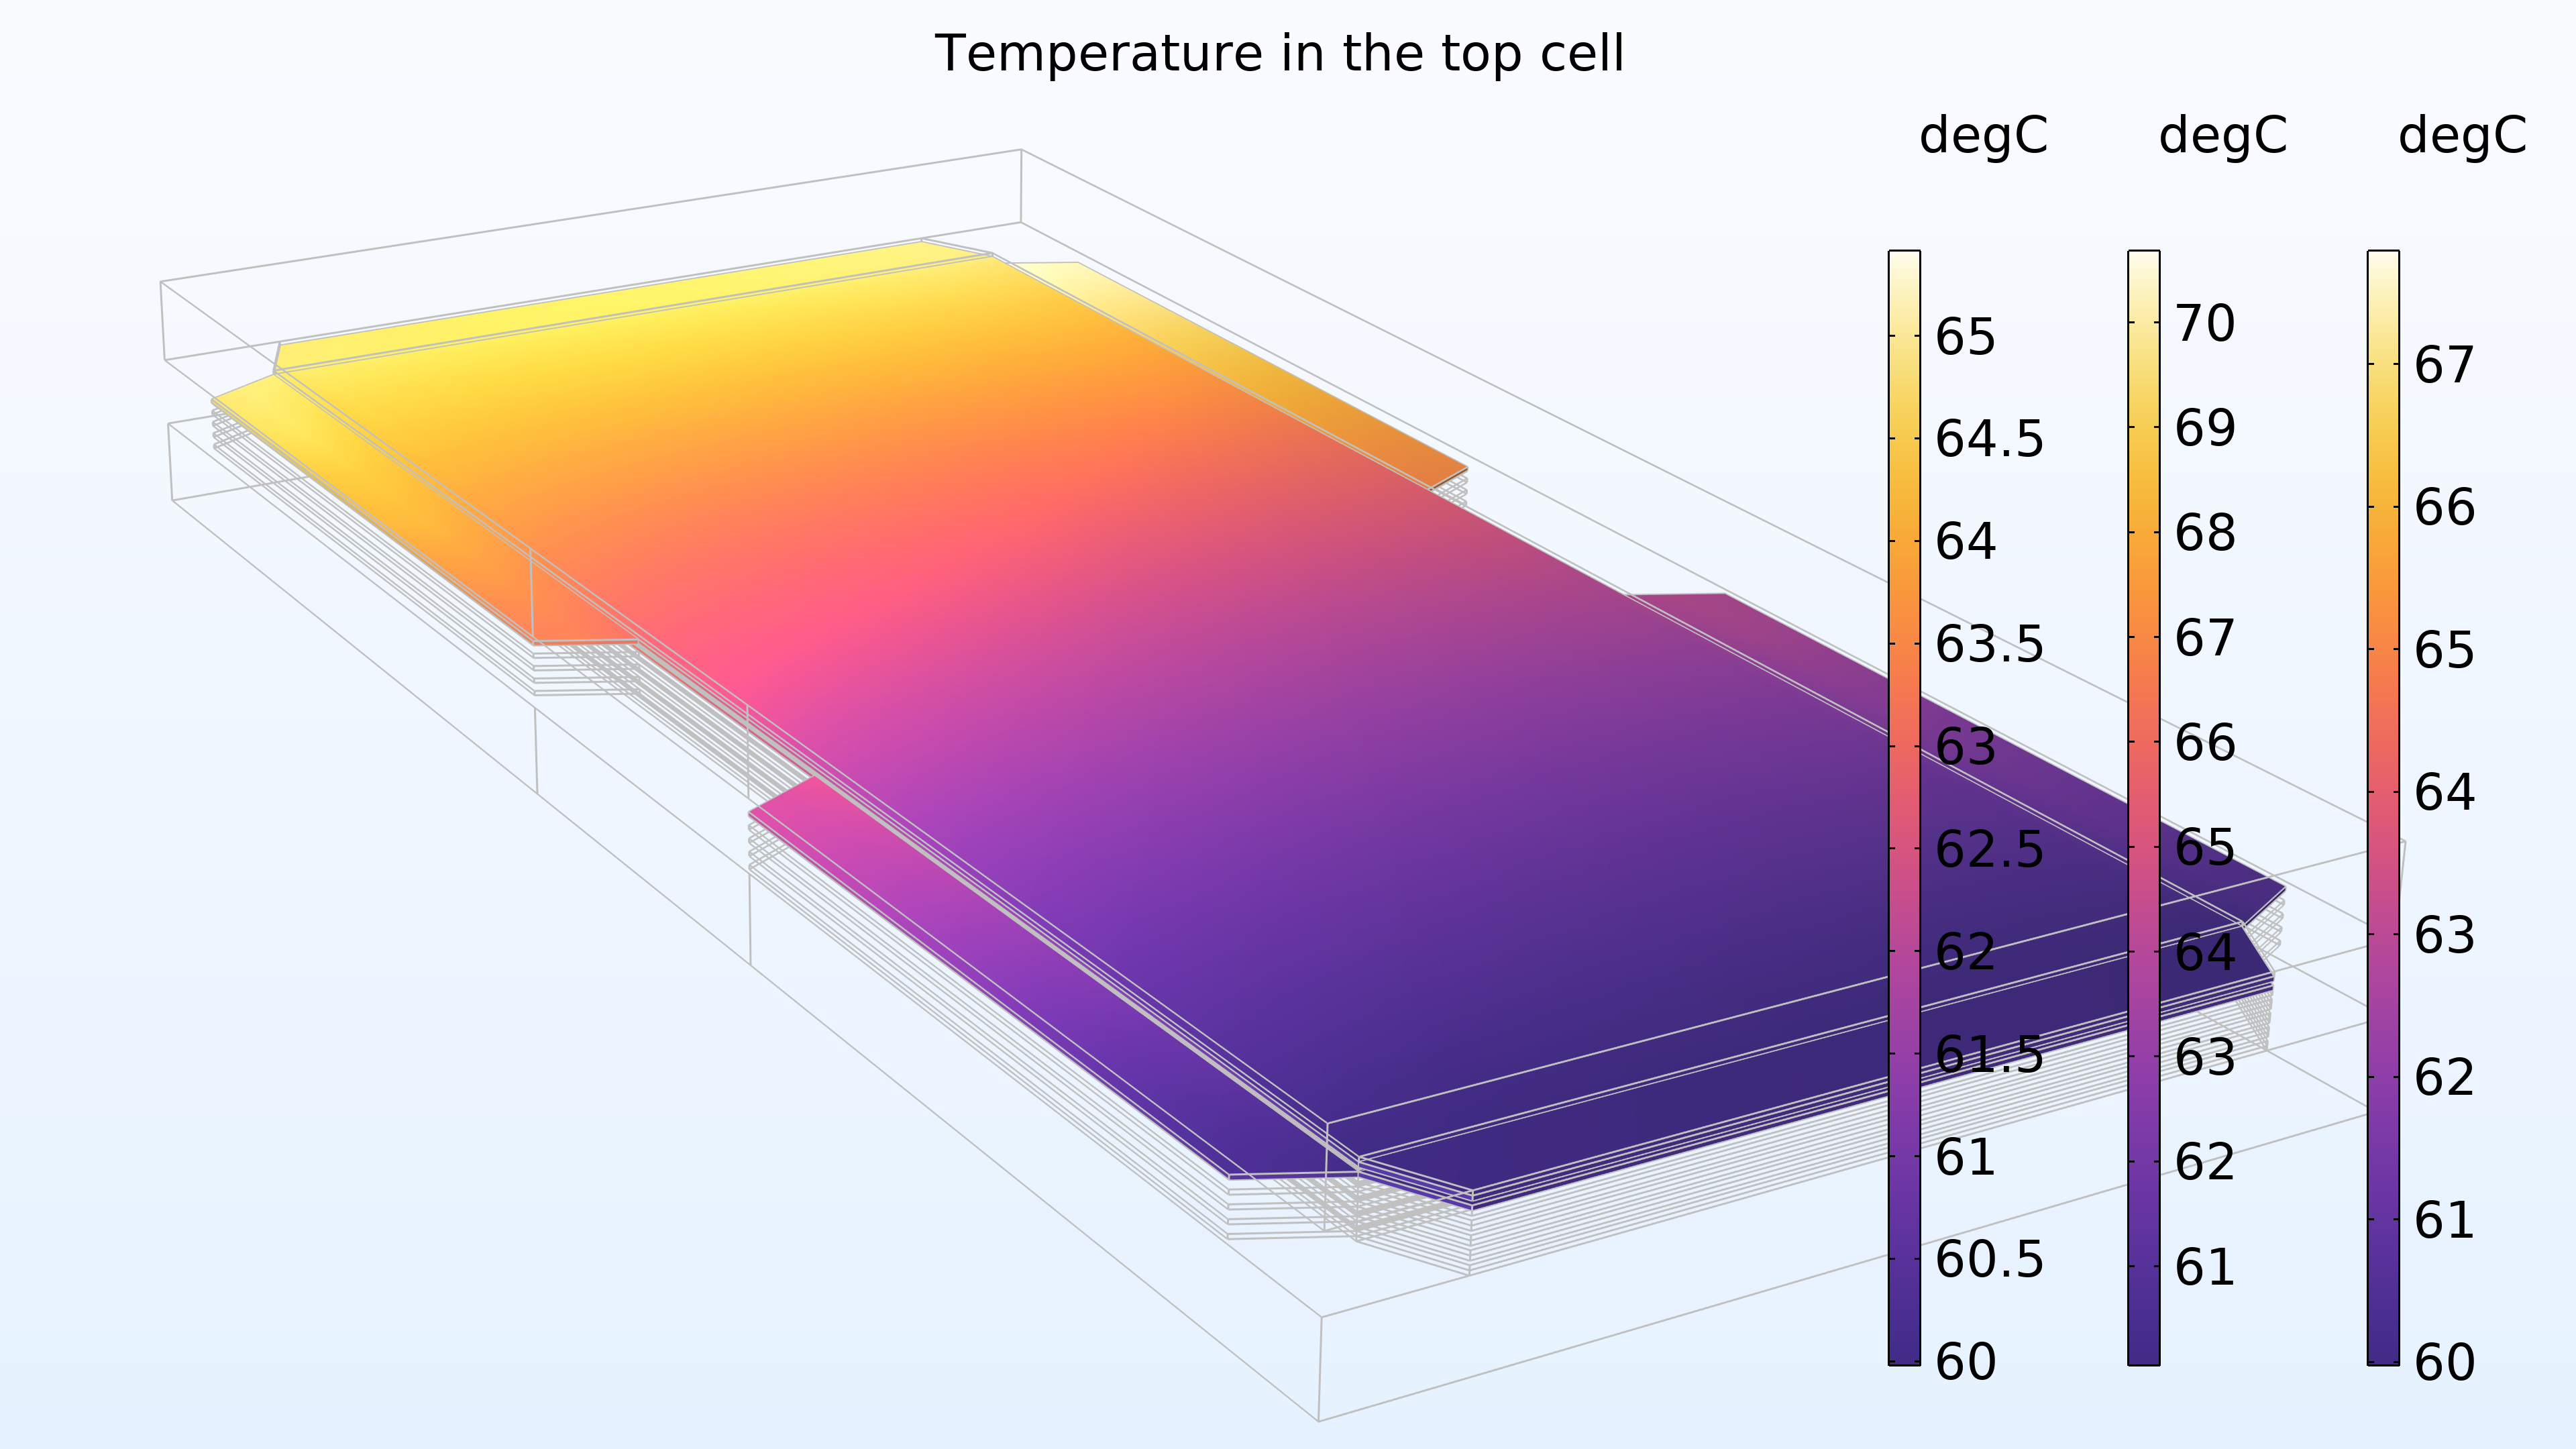 A plot showing the temperature in the top cell with the HeatCamera color table, where the leftmost side of the model is yellow, the middle is pink and purple, and the rightmost side is dark purple.